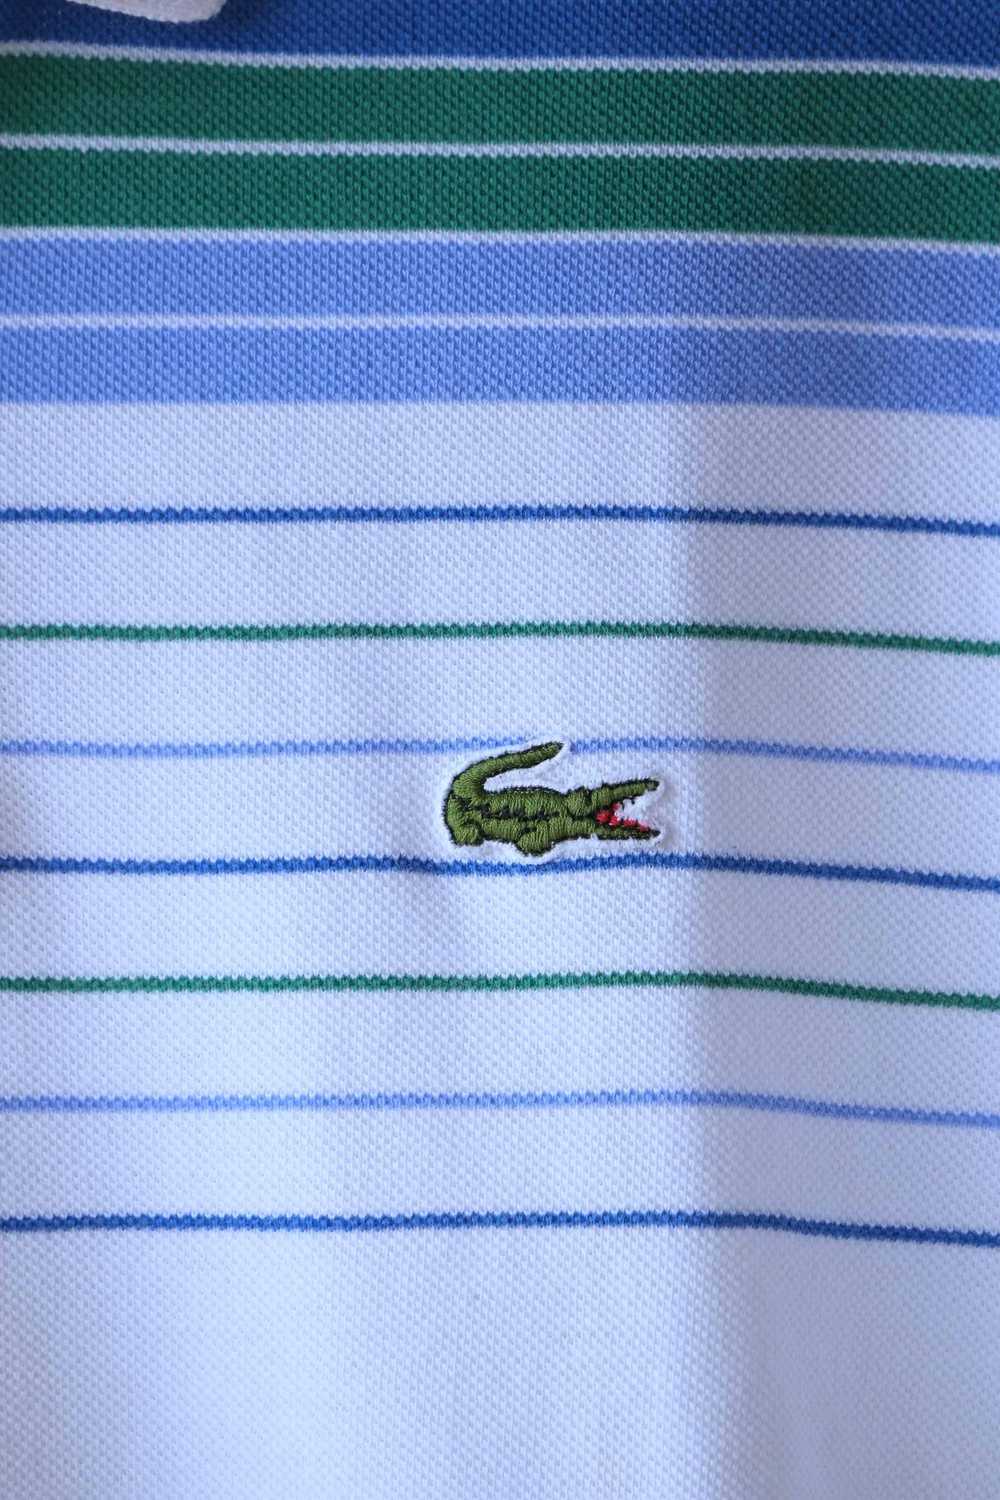 LACOSTE Vintage Striped Polo - image 3